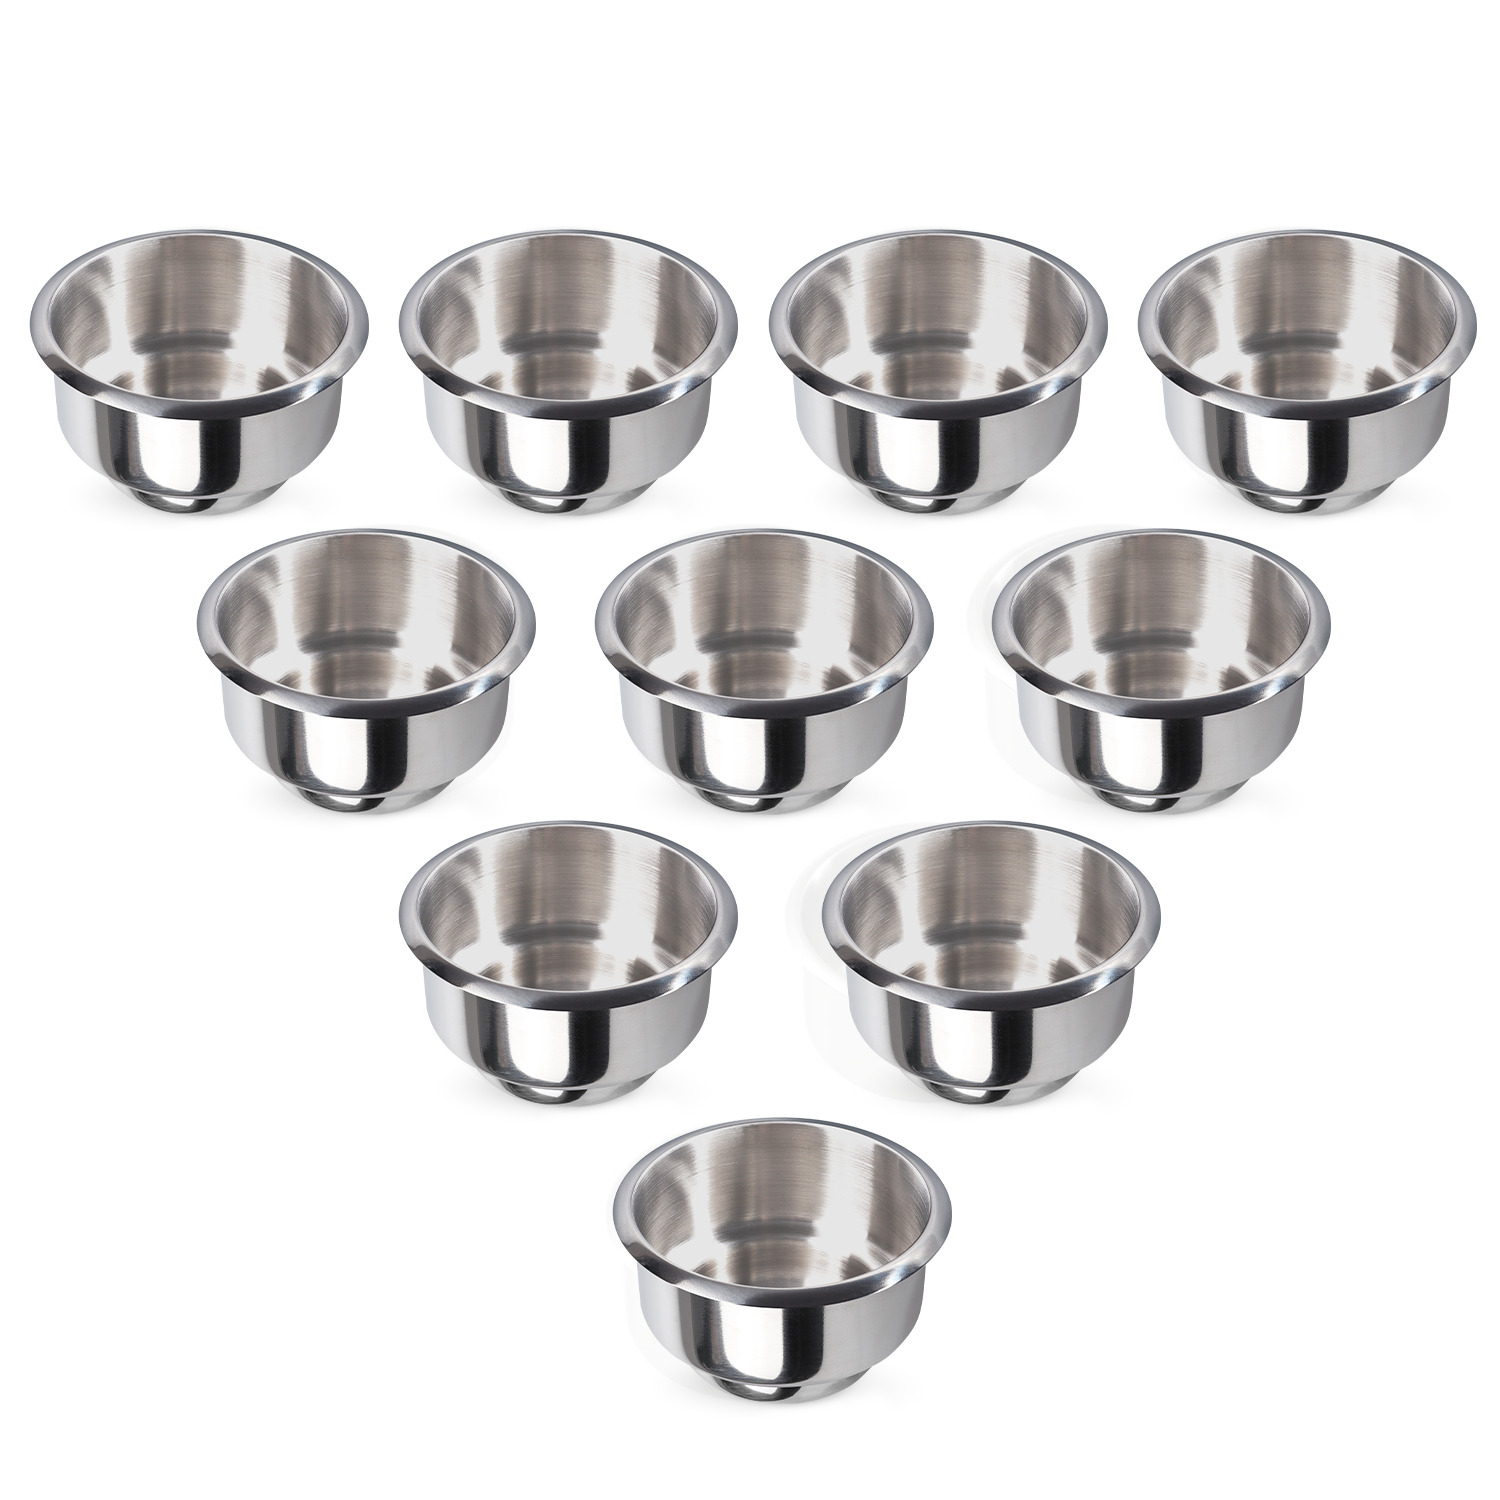 10-Pack Universal DUAL-SIZE Steel Cup Drink Holders for Car/Truck/Camper/RV/Boat